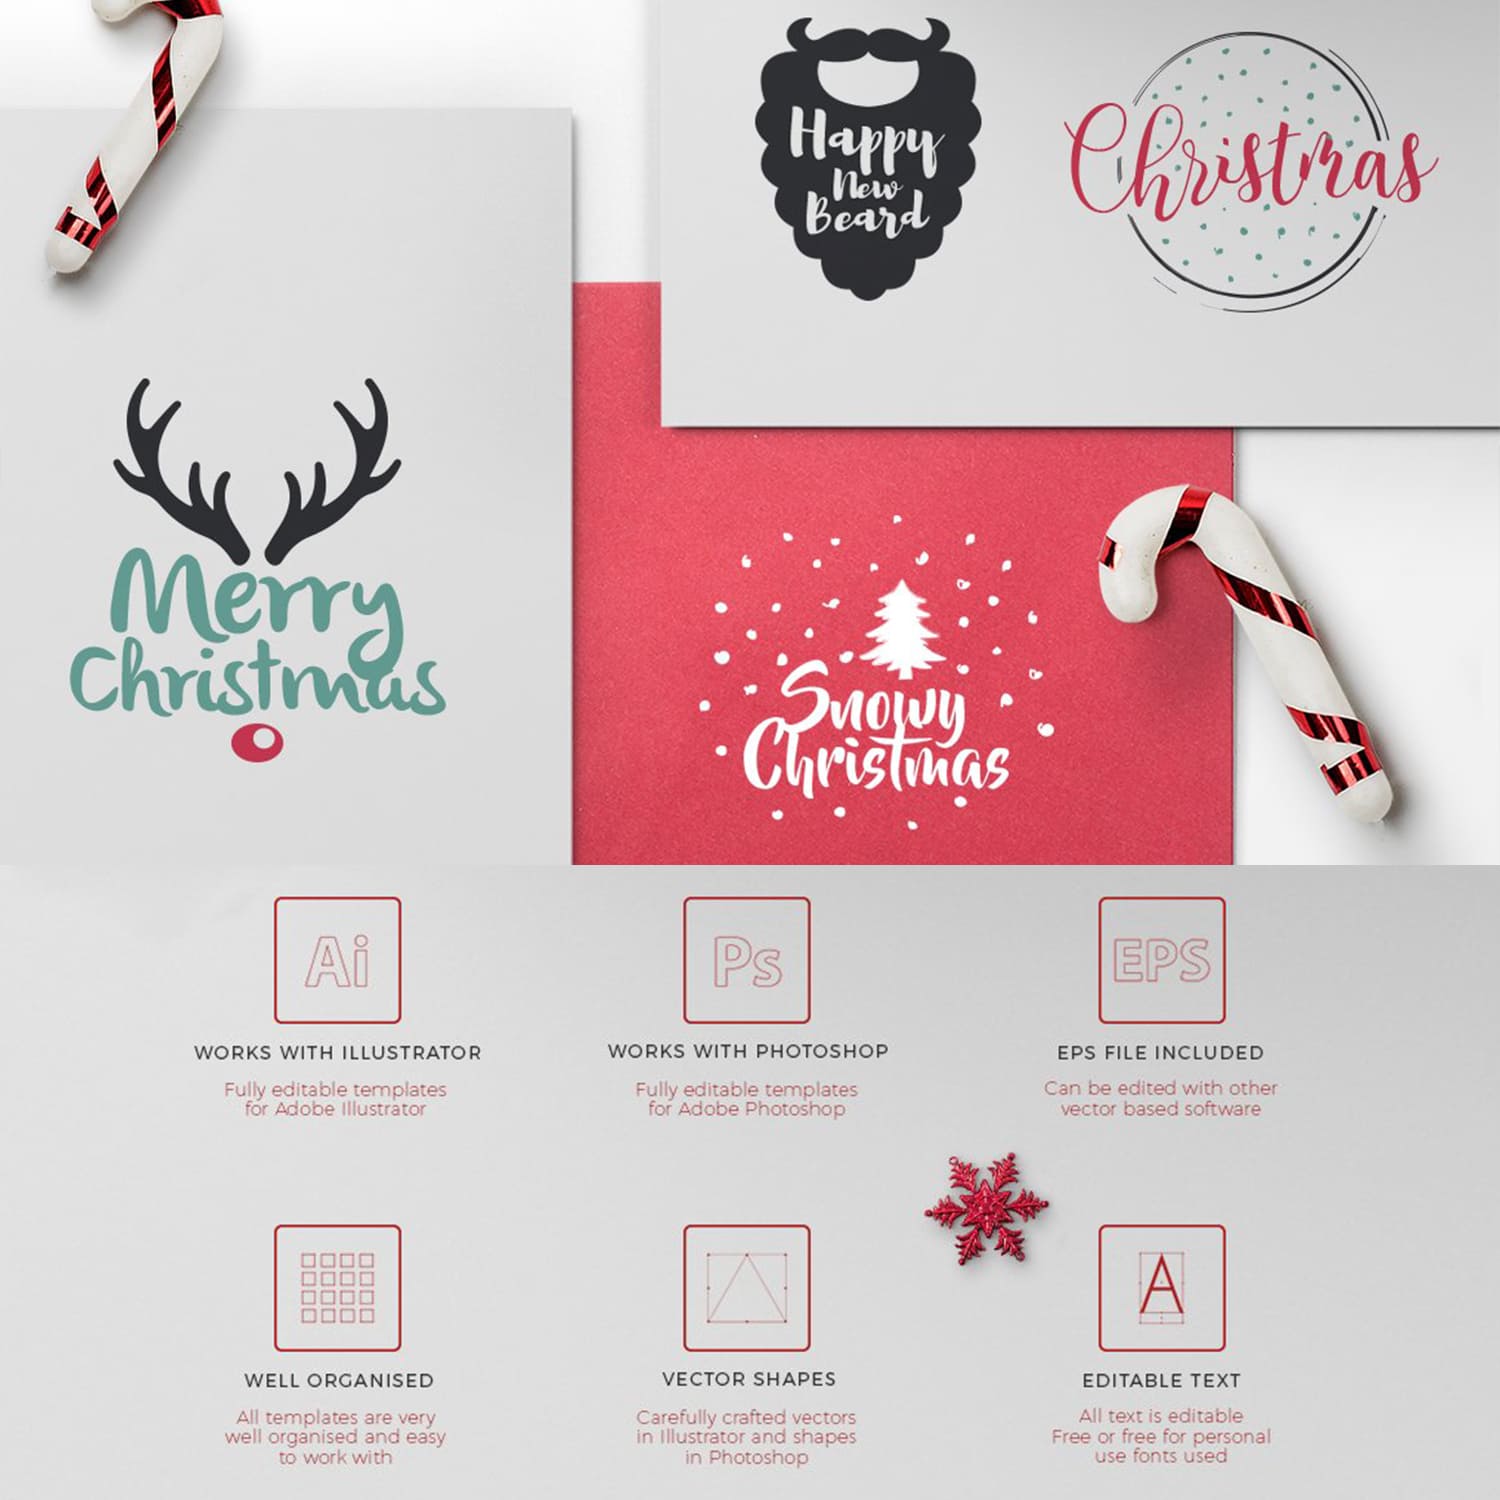 Christmas Logos Pack cover image.